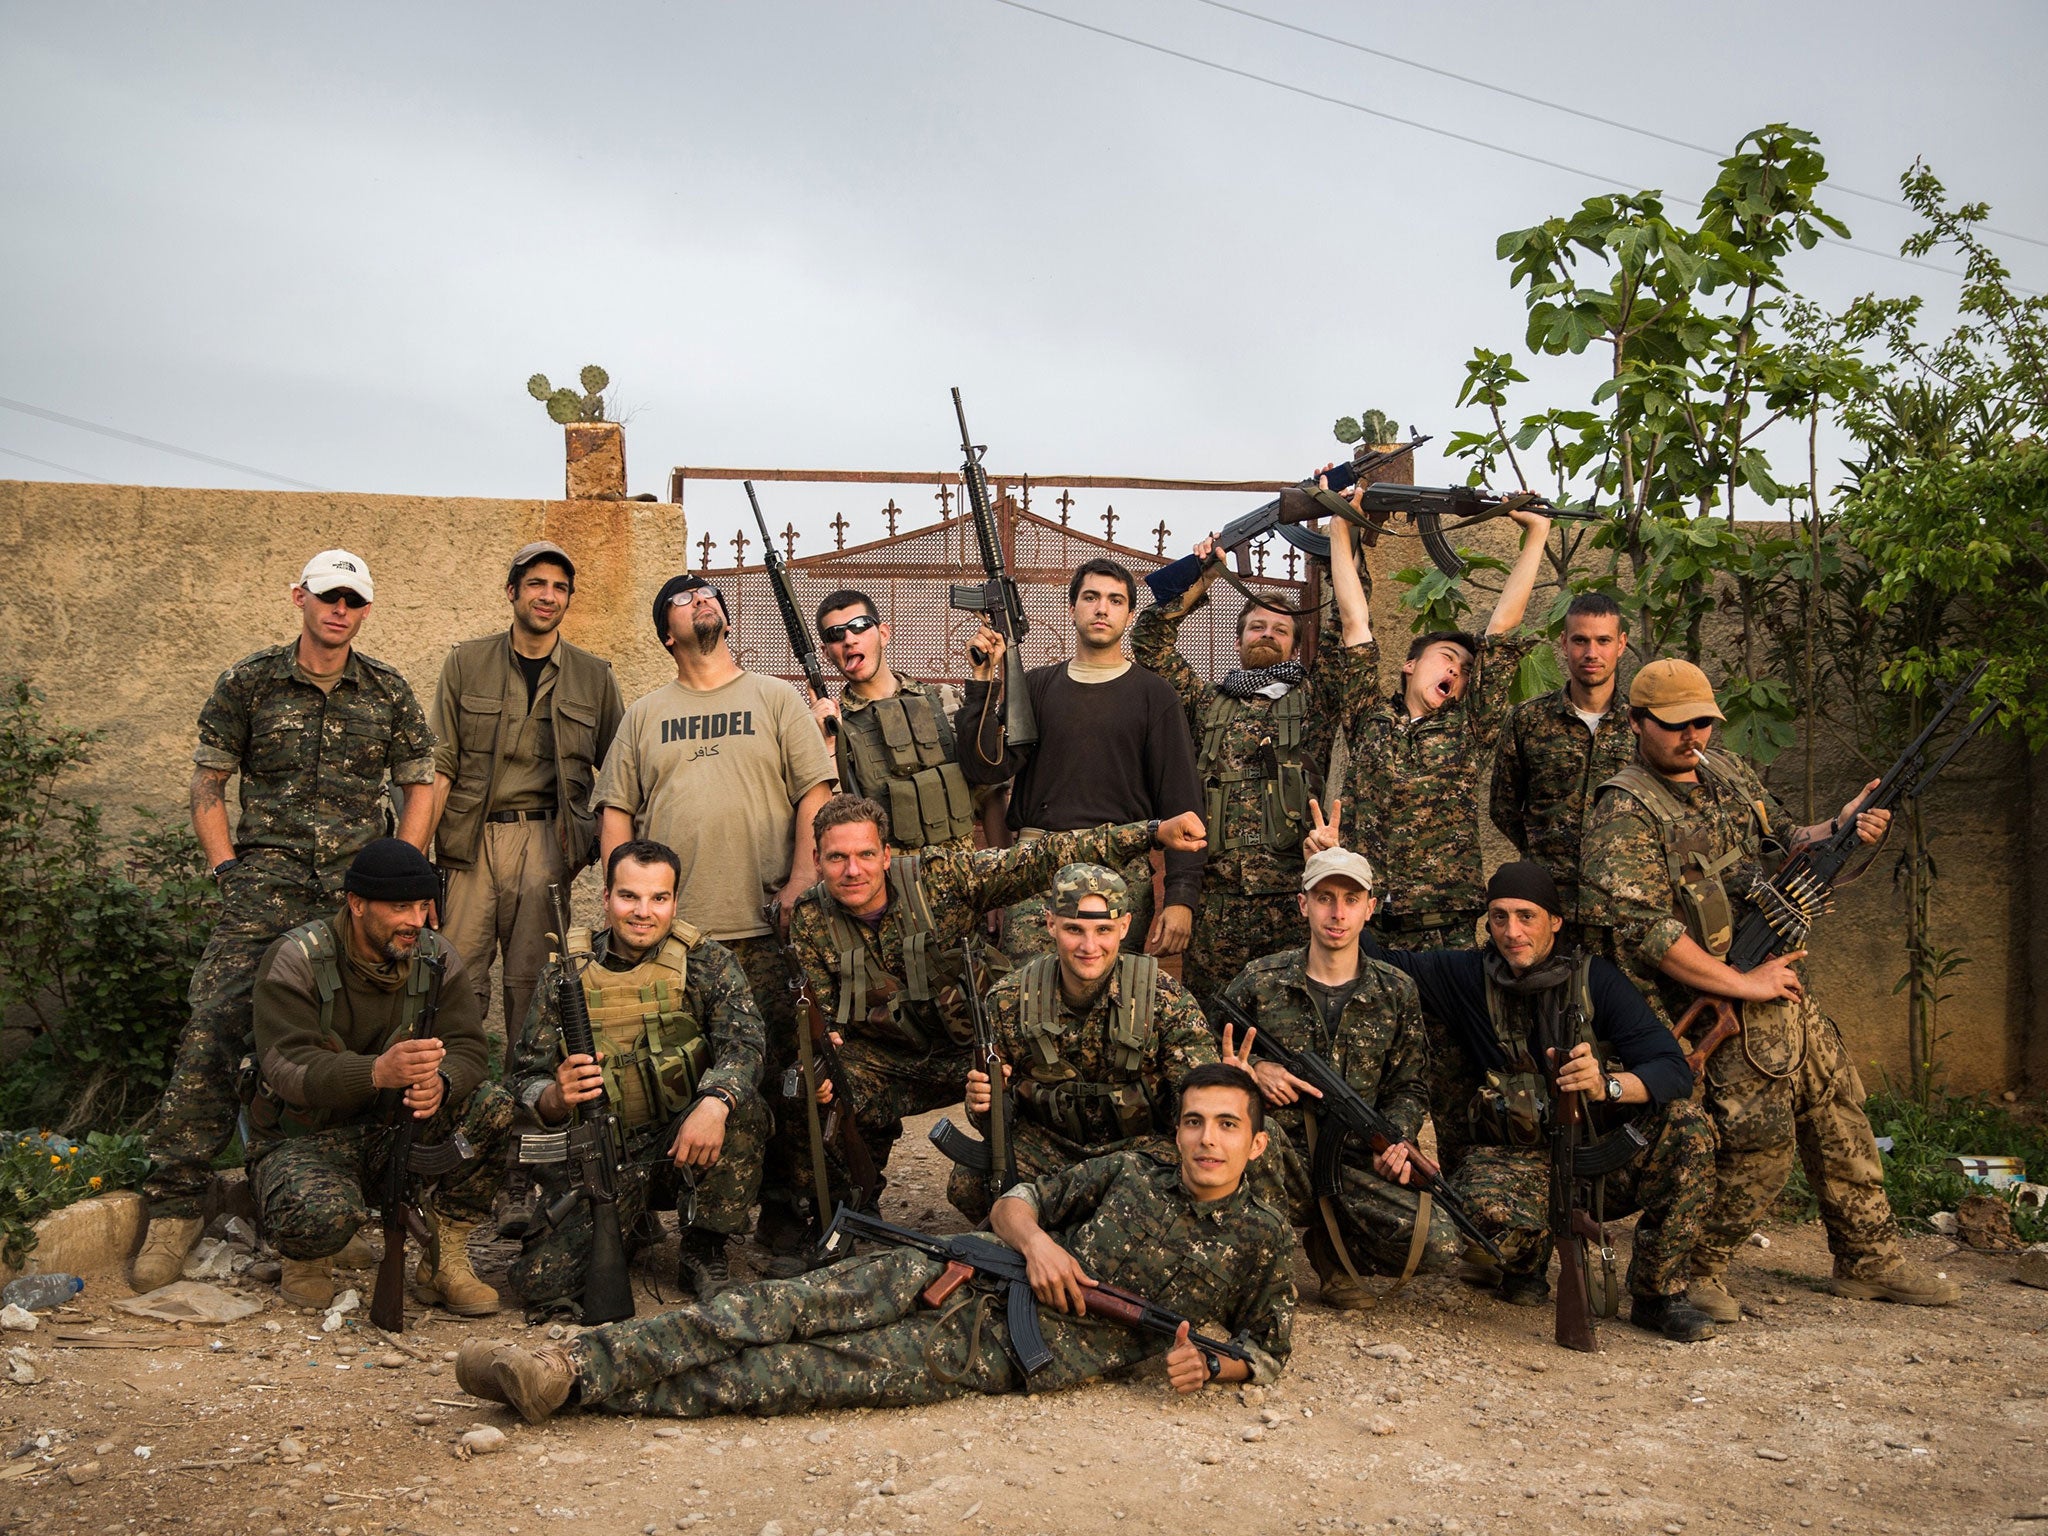 A group of international foreign fighters pose for a photo on April 16, 2015, in the outskirts of the north-western Syrian town of Tal Tamr